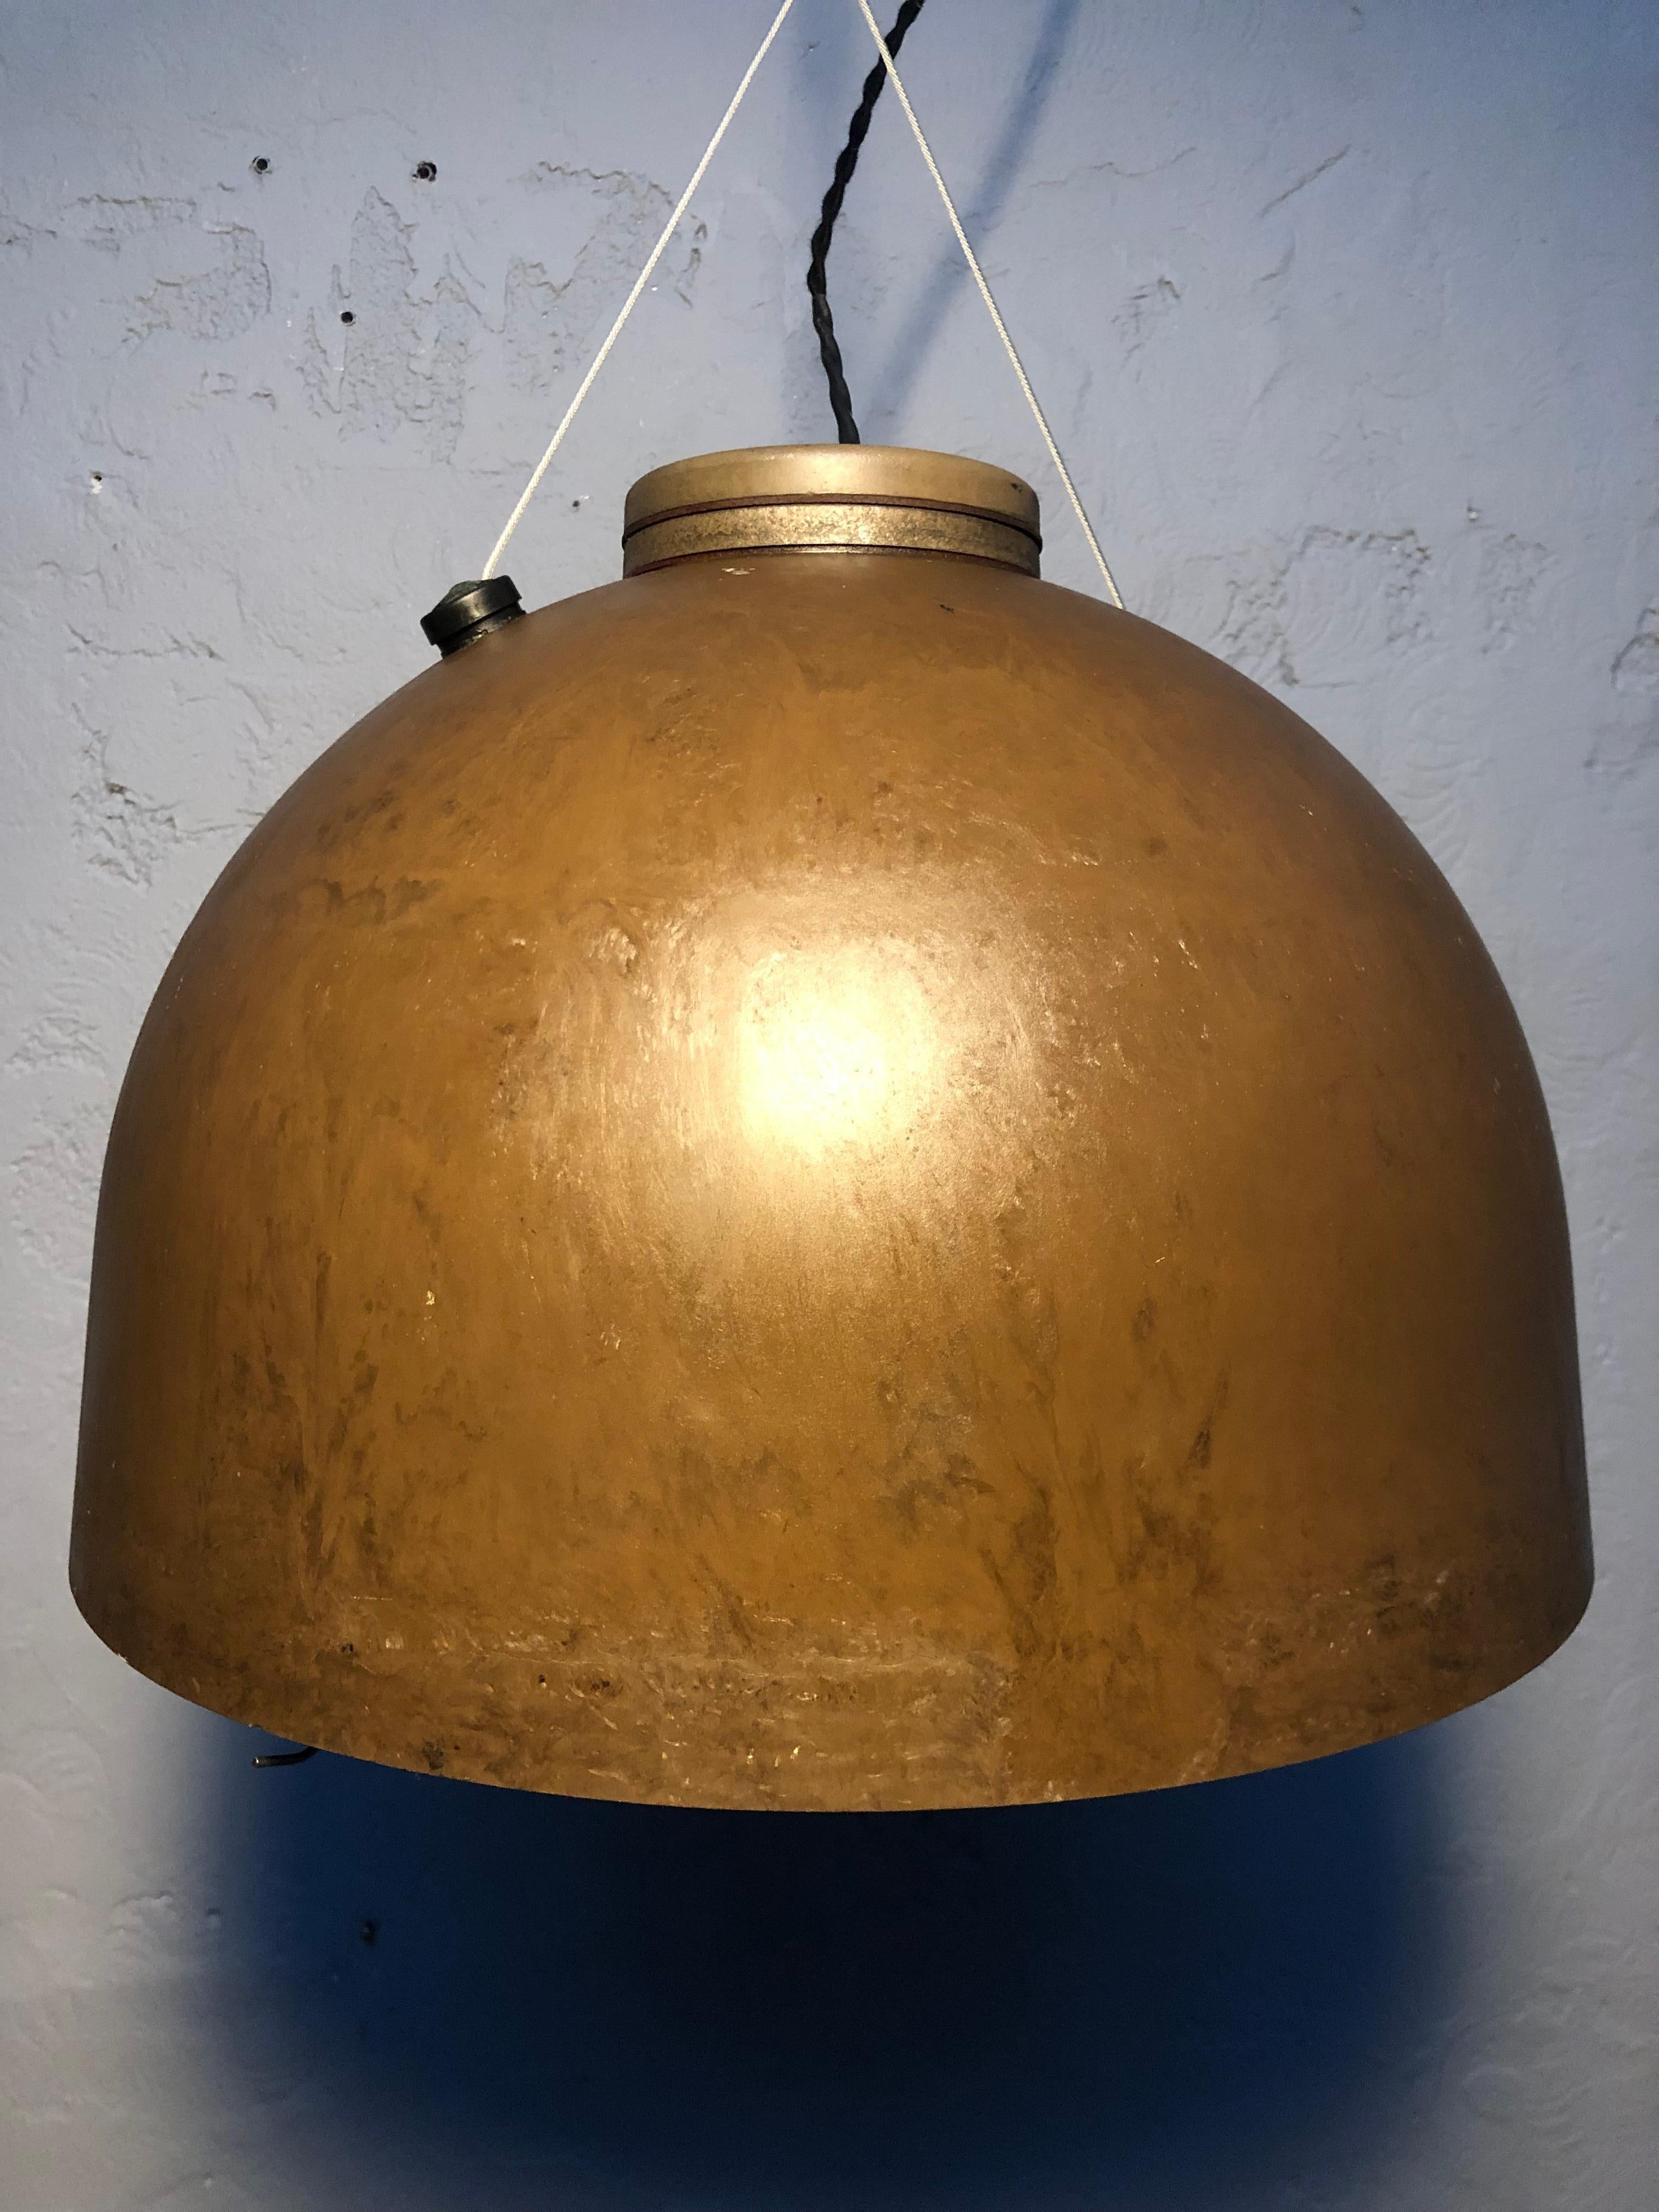 Fiberglass Vintage Copenhagen Street Lamps Form the 1970s and Made in Denmark by Philips  For Sale